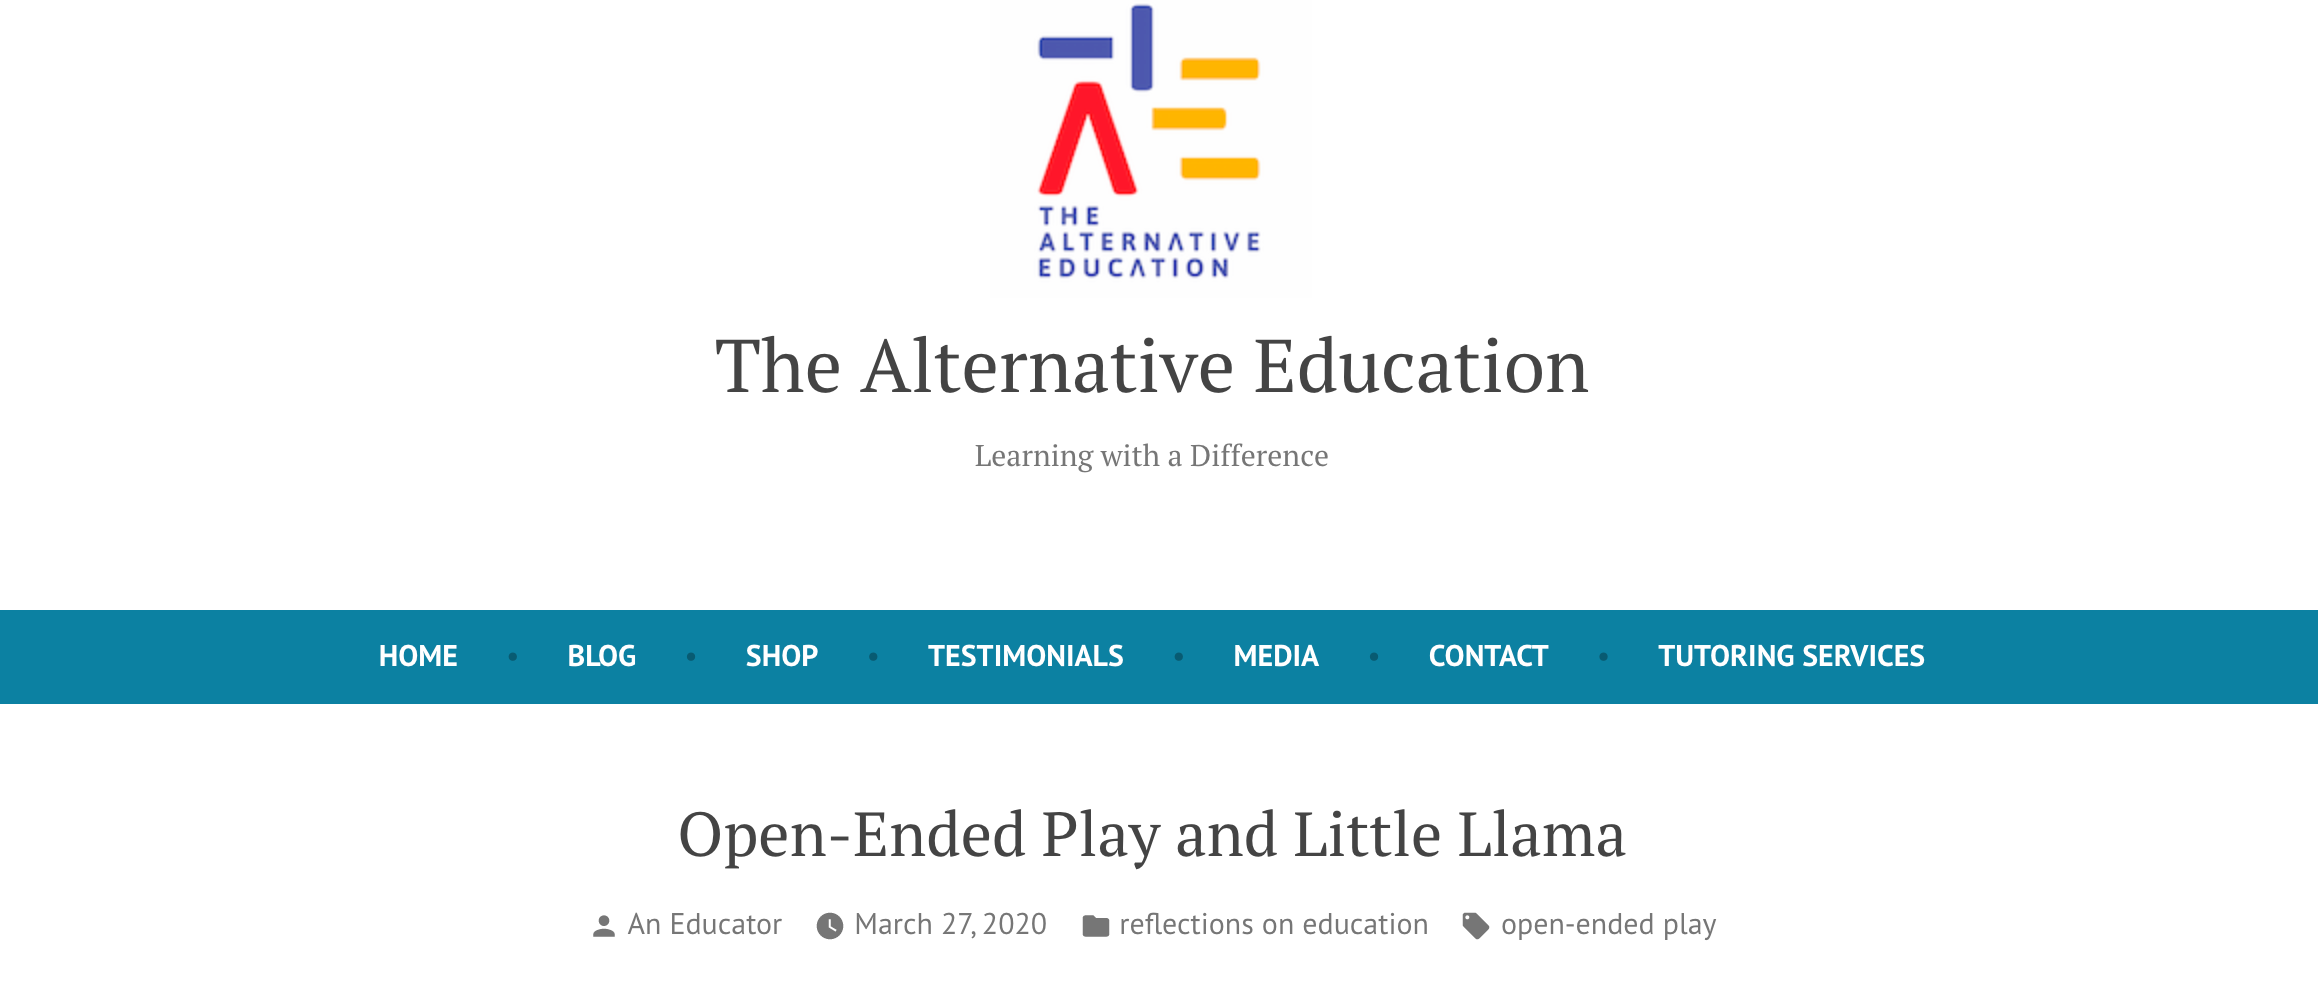 A Senior Educational Therapist shares about Open-ended Play with toys from Little Llama!